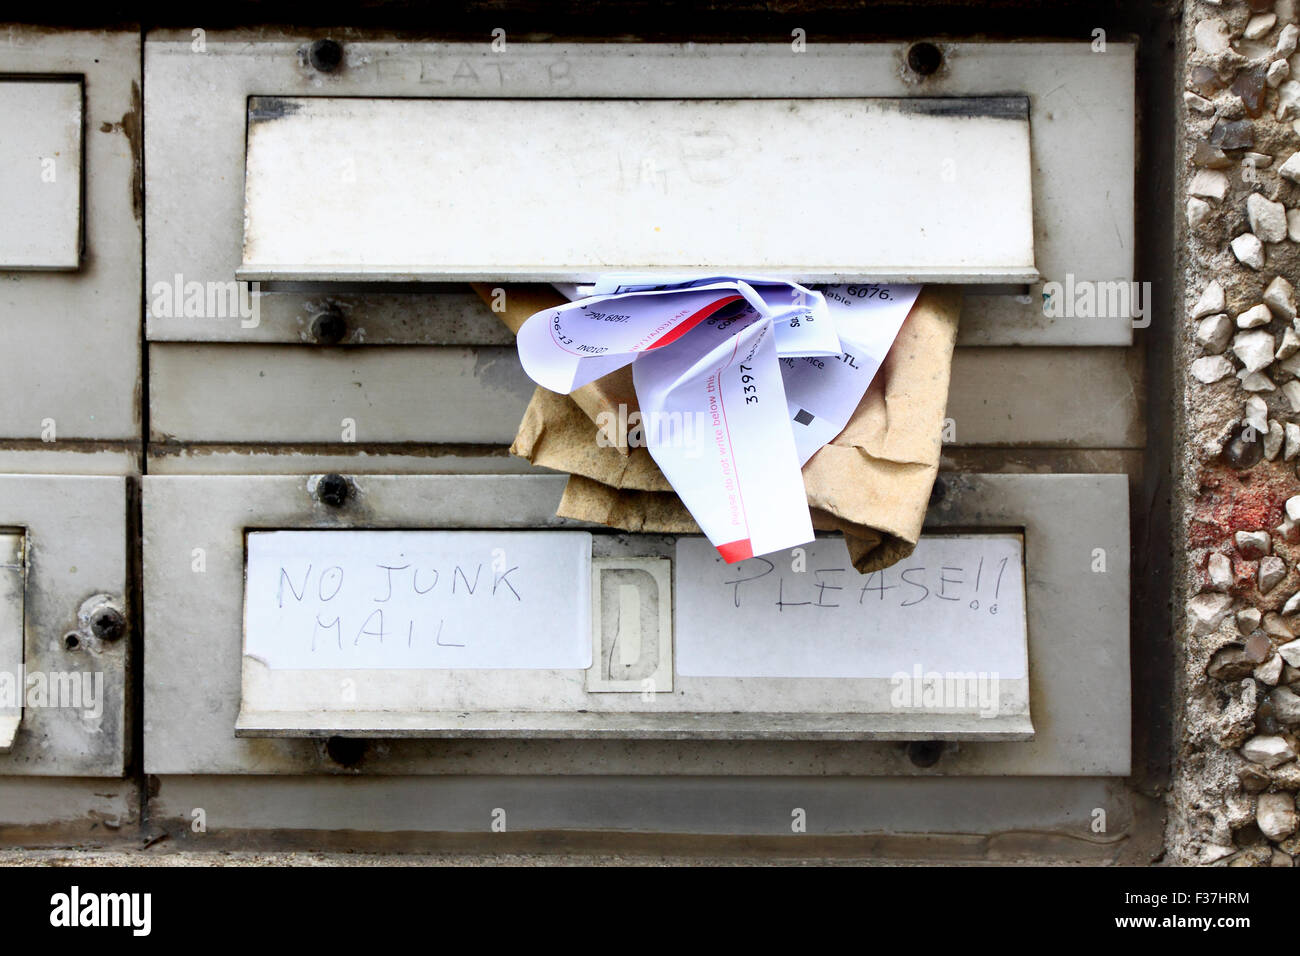 Junk mail stuffed into an apartment's mailbox, while another apartment owner has left instructions for no junk mail. Stock Photo